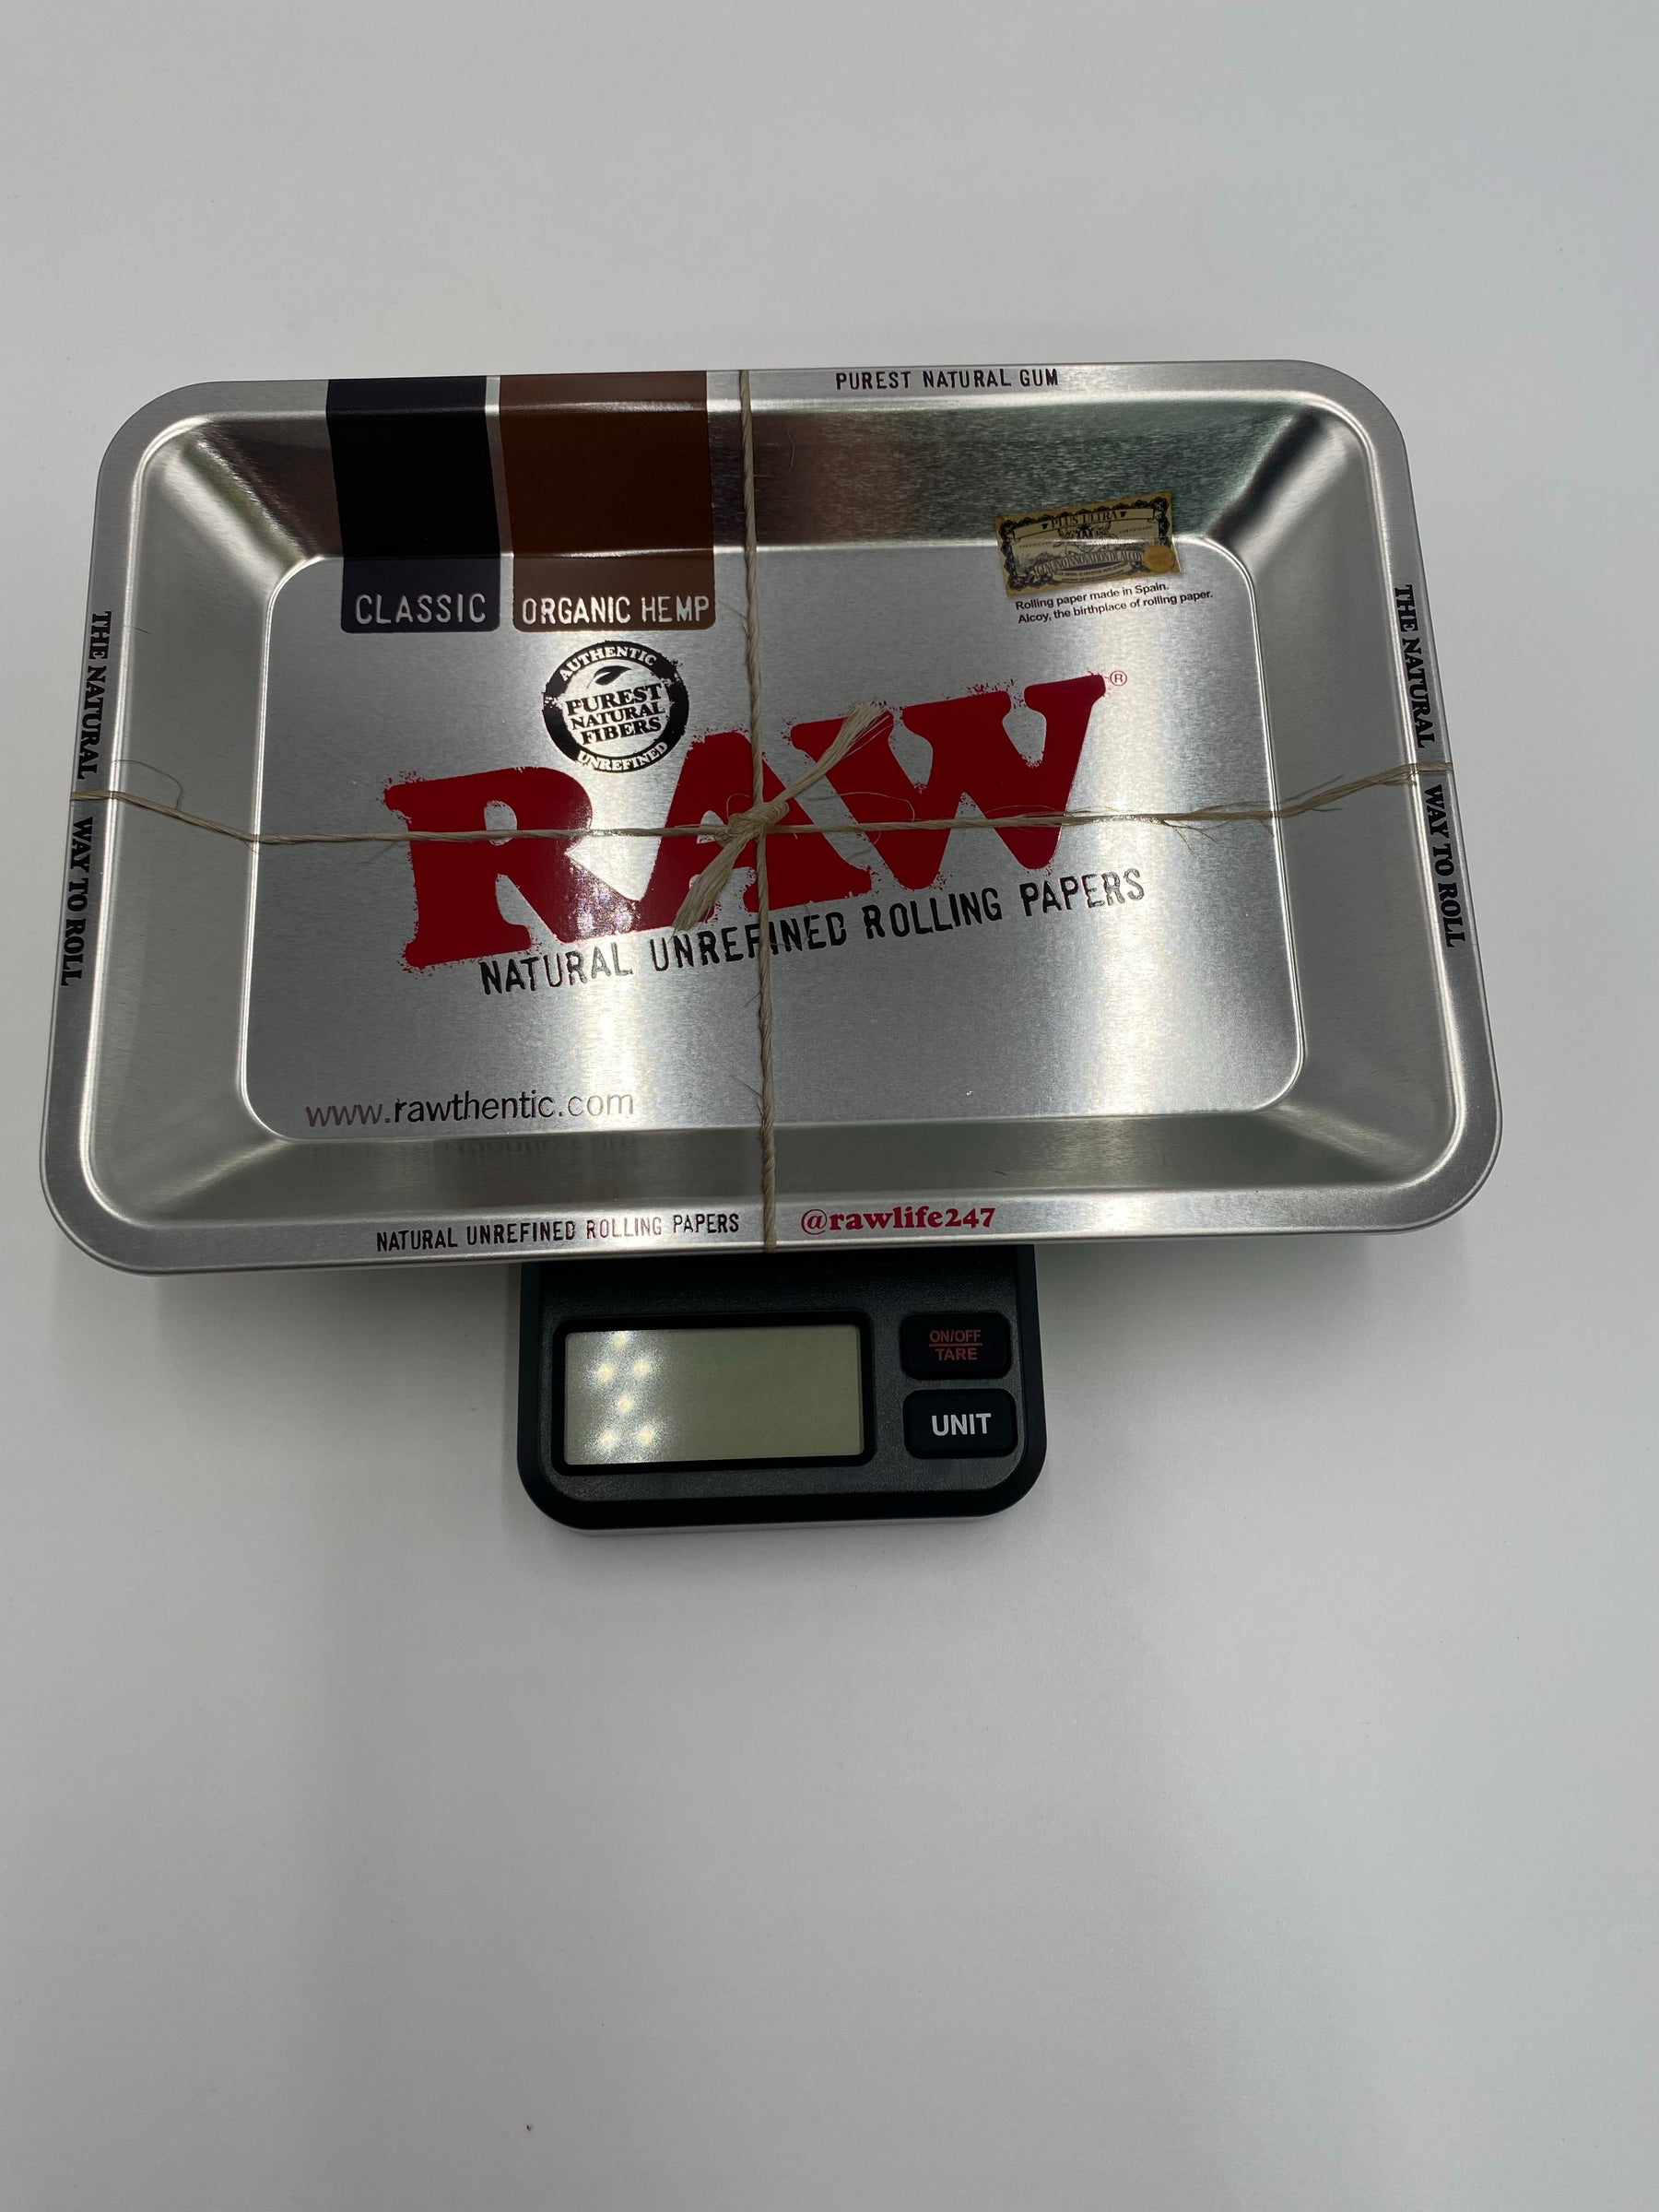 MY WEIGH X RAW TRAY SCALE ( INCLUDES RAW MINI ROLLING TRAY)